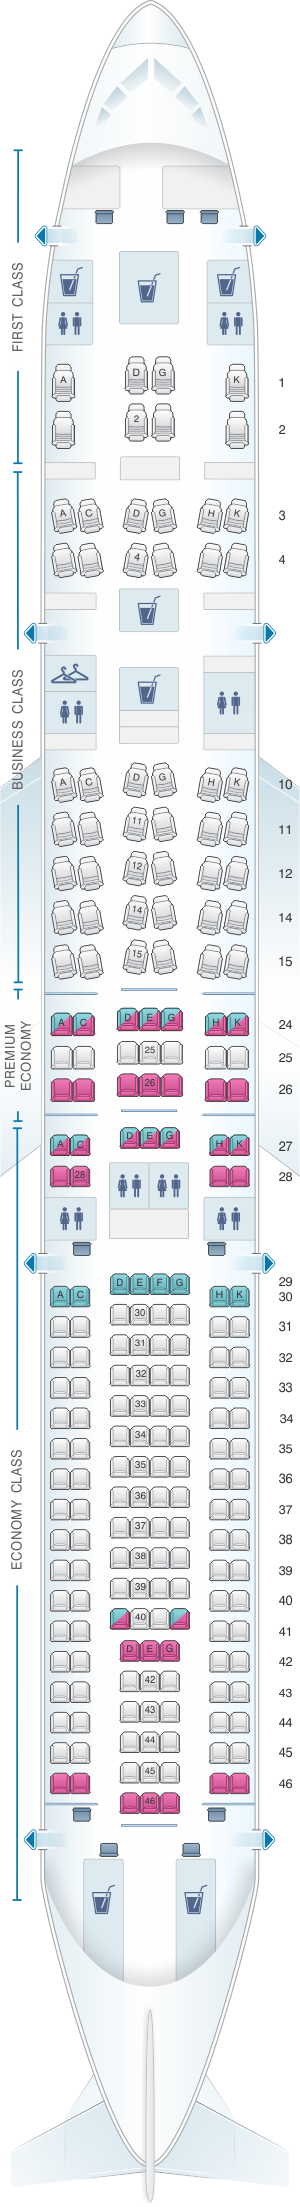 Seat map for Lufthansa Airbus A330 300 216pax